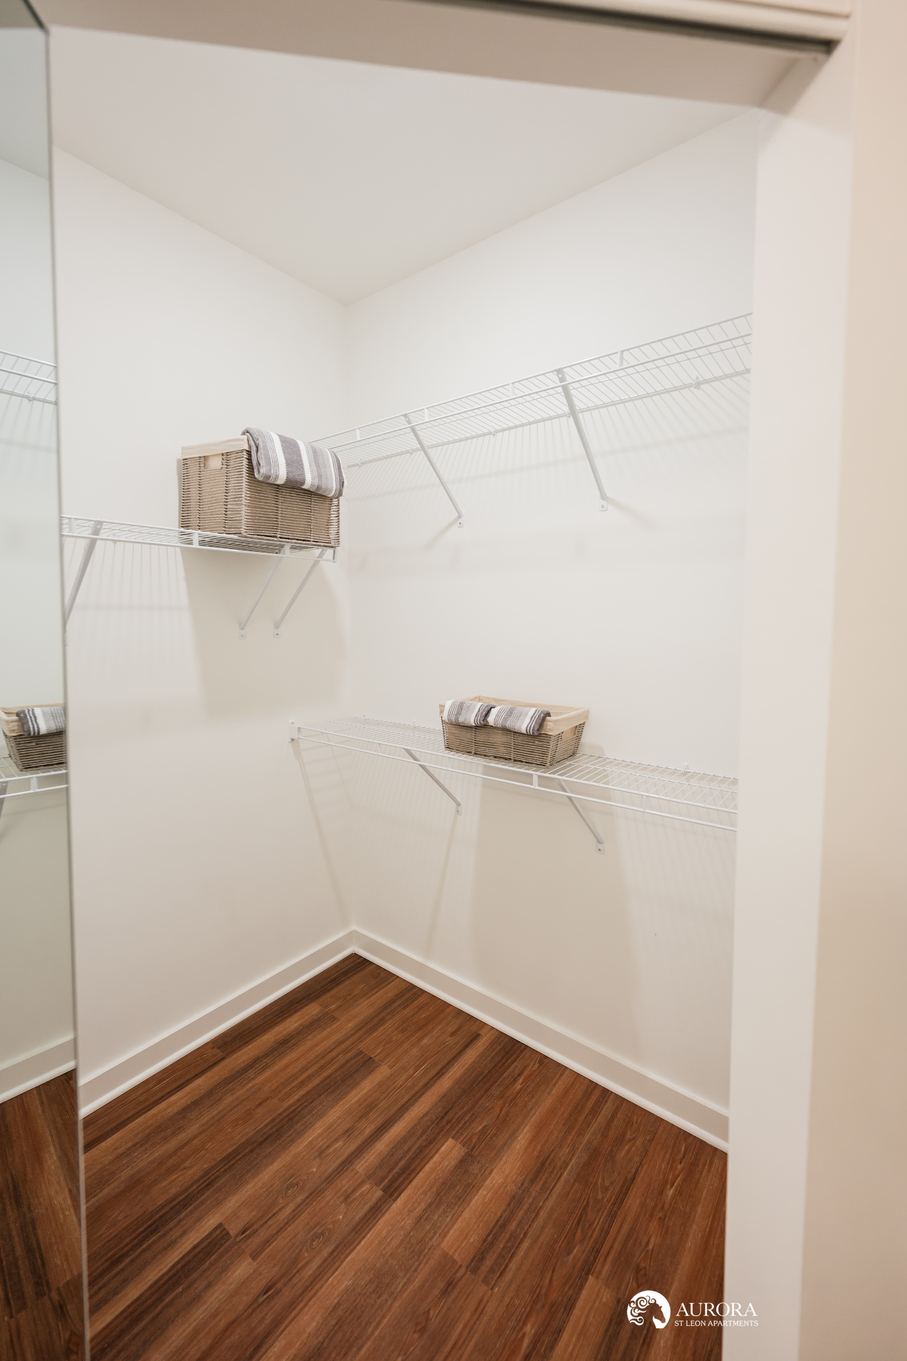 A walk in closet with 42 shelves and baskets.